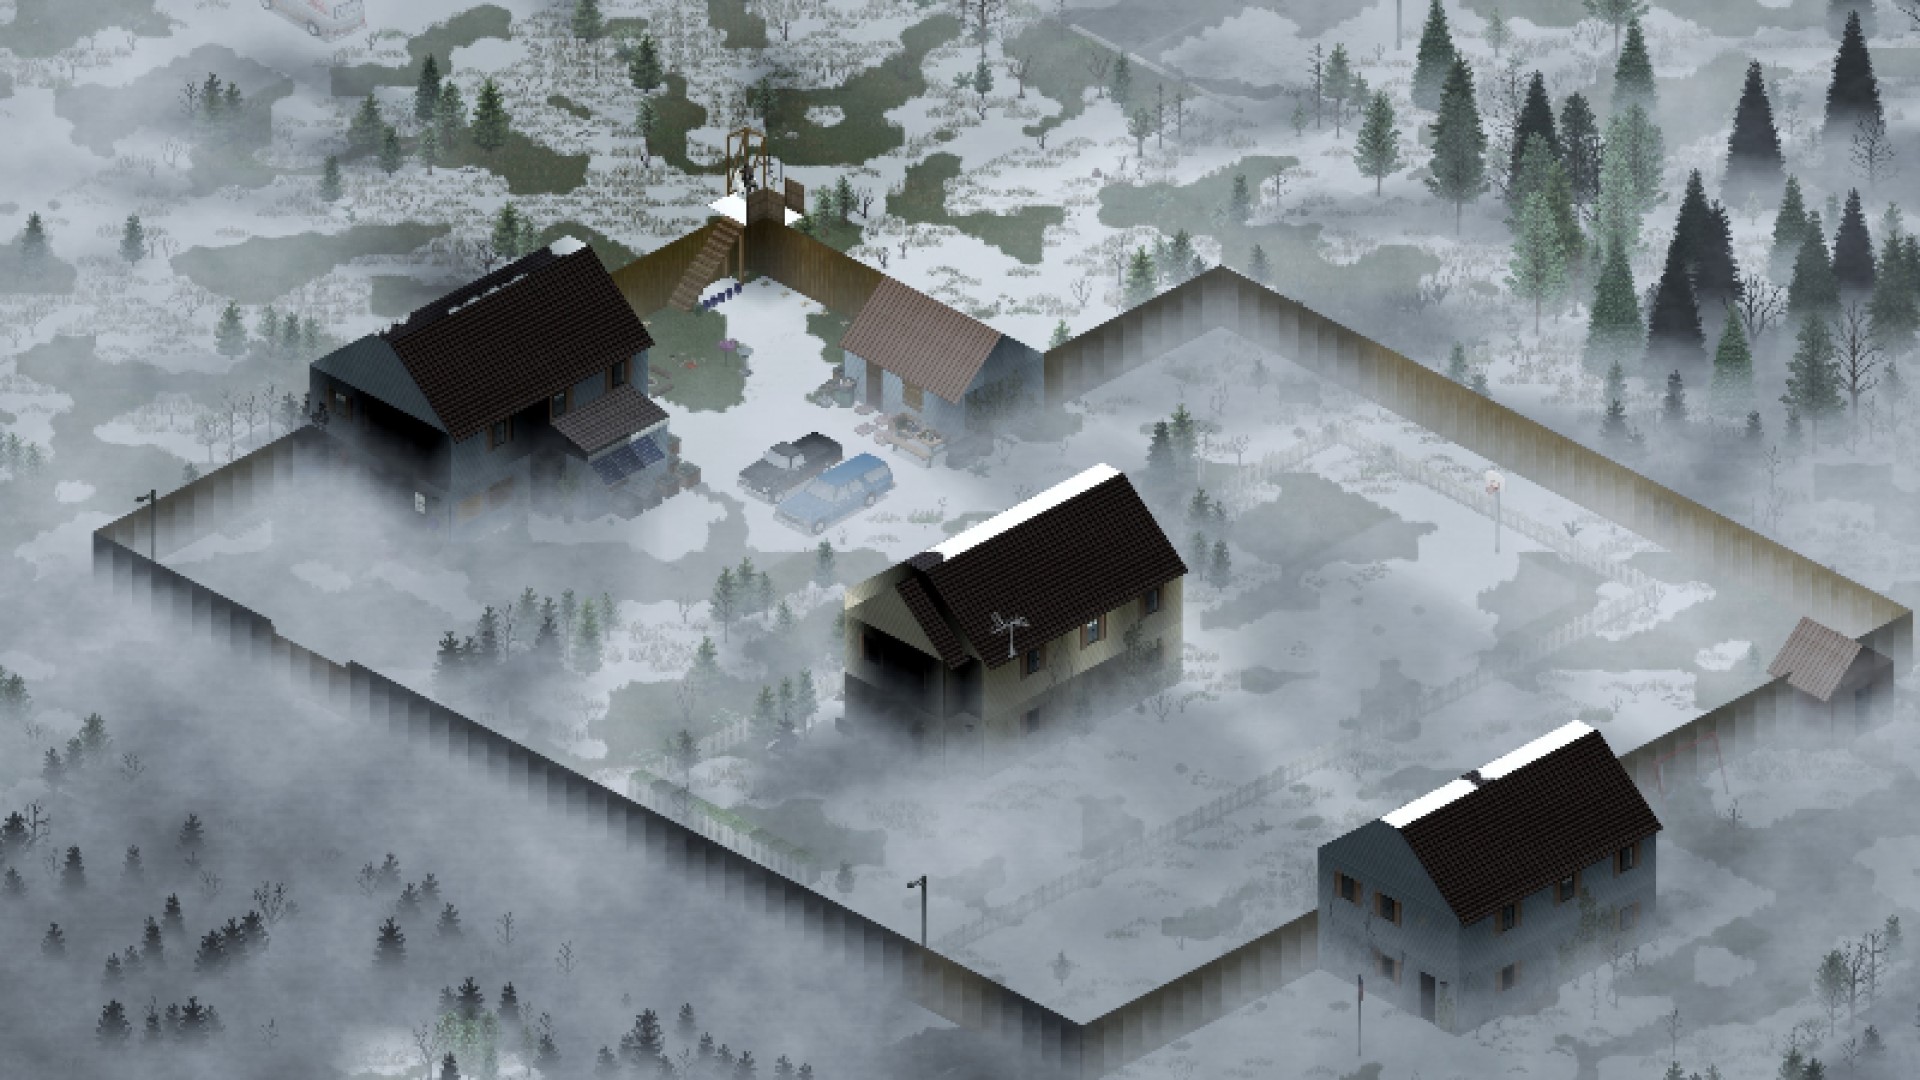 Project Zomboid Build 42 will make the map a lot bigger